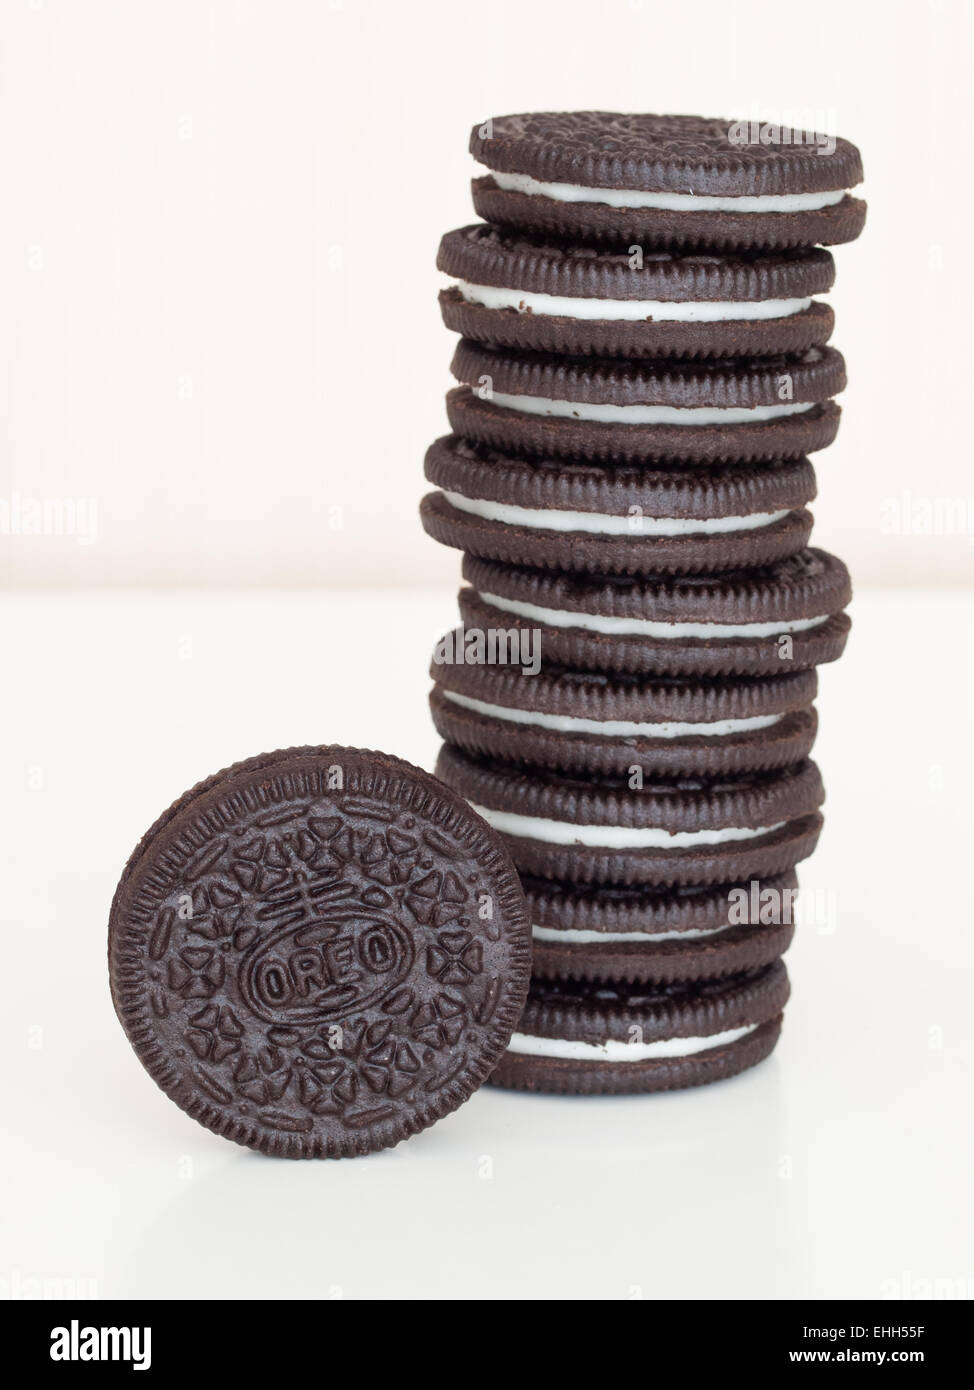 A stack of Oreo cookies. Stock Photo